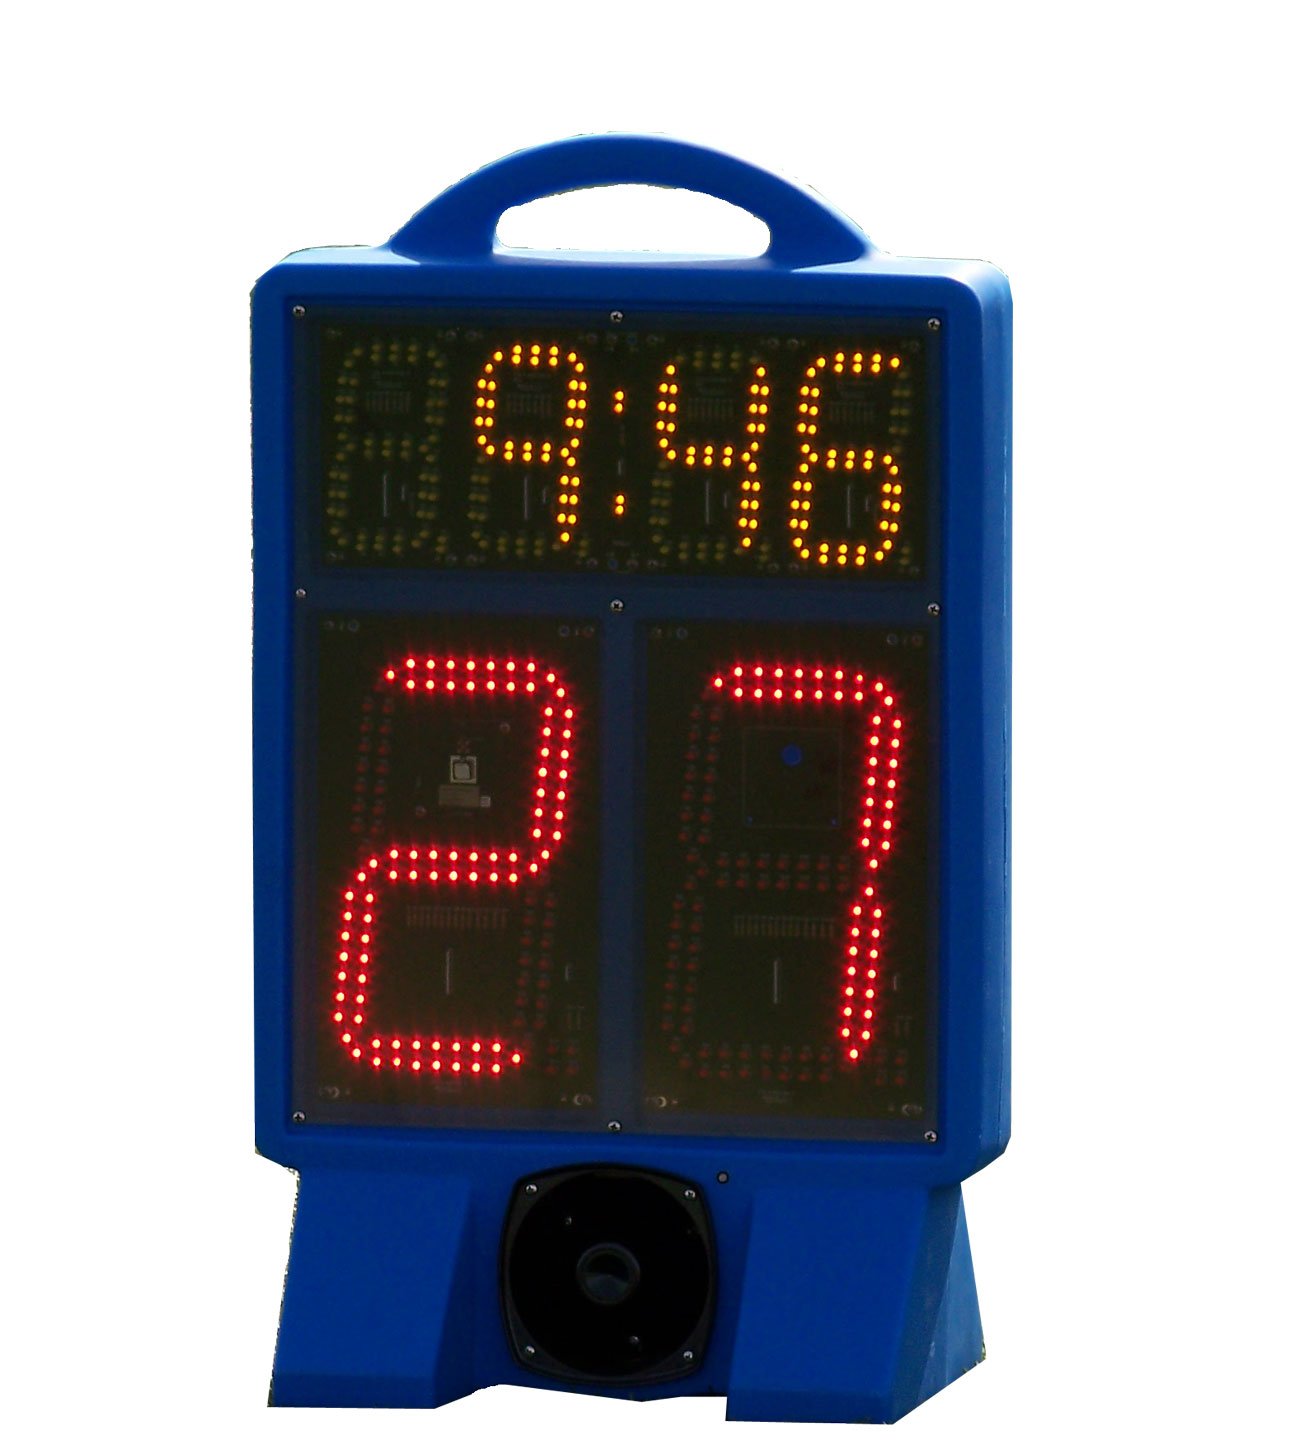 Deck Clock for Training (DC-1500)